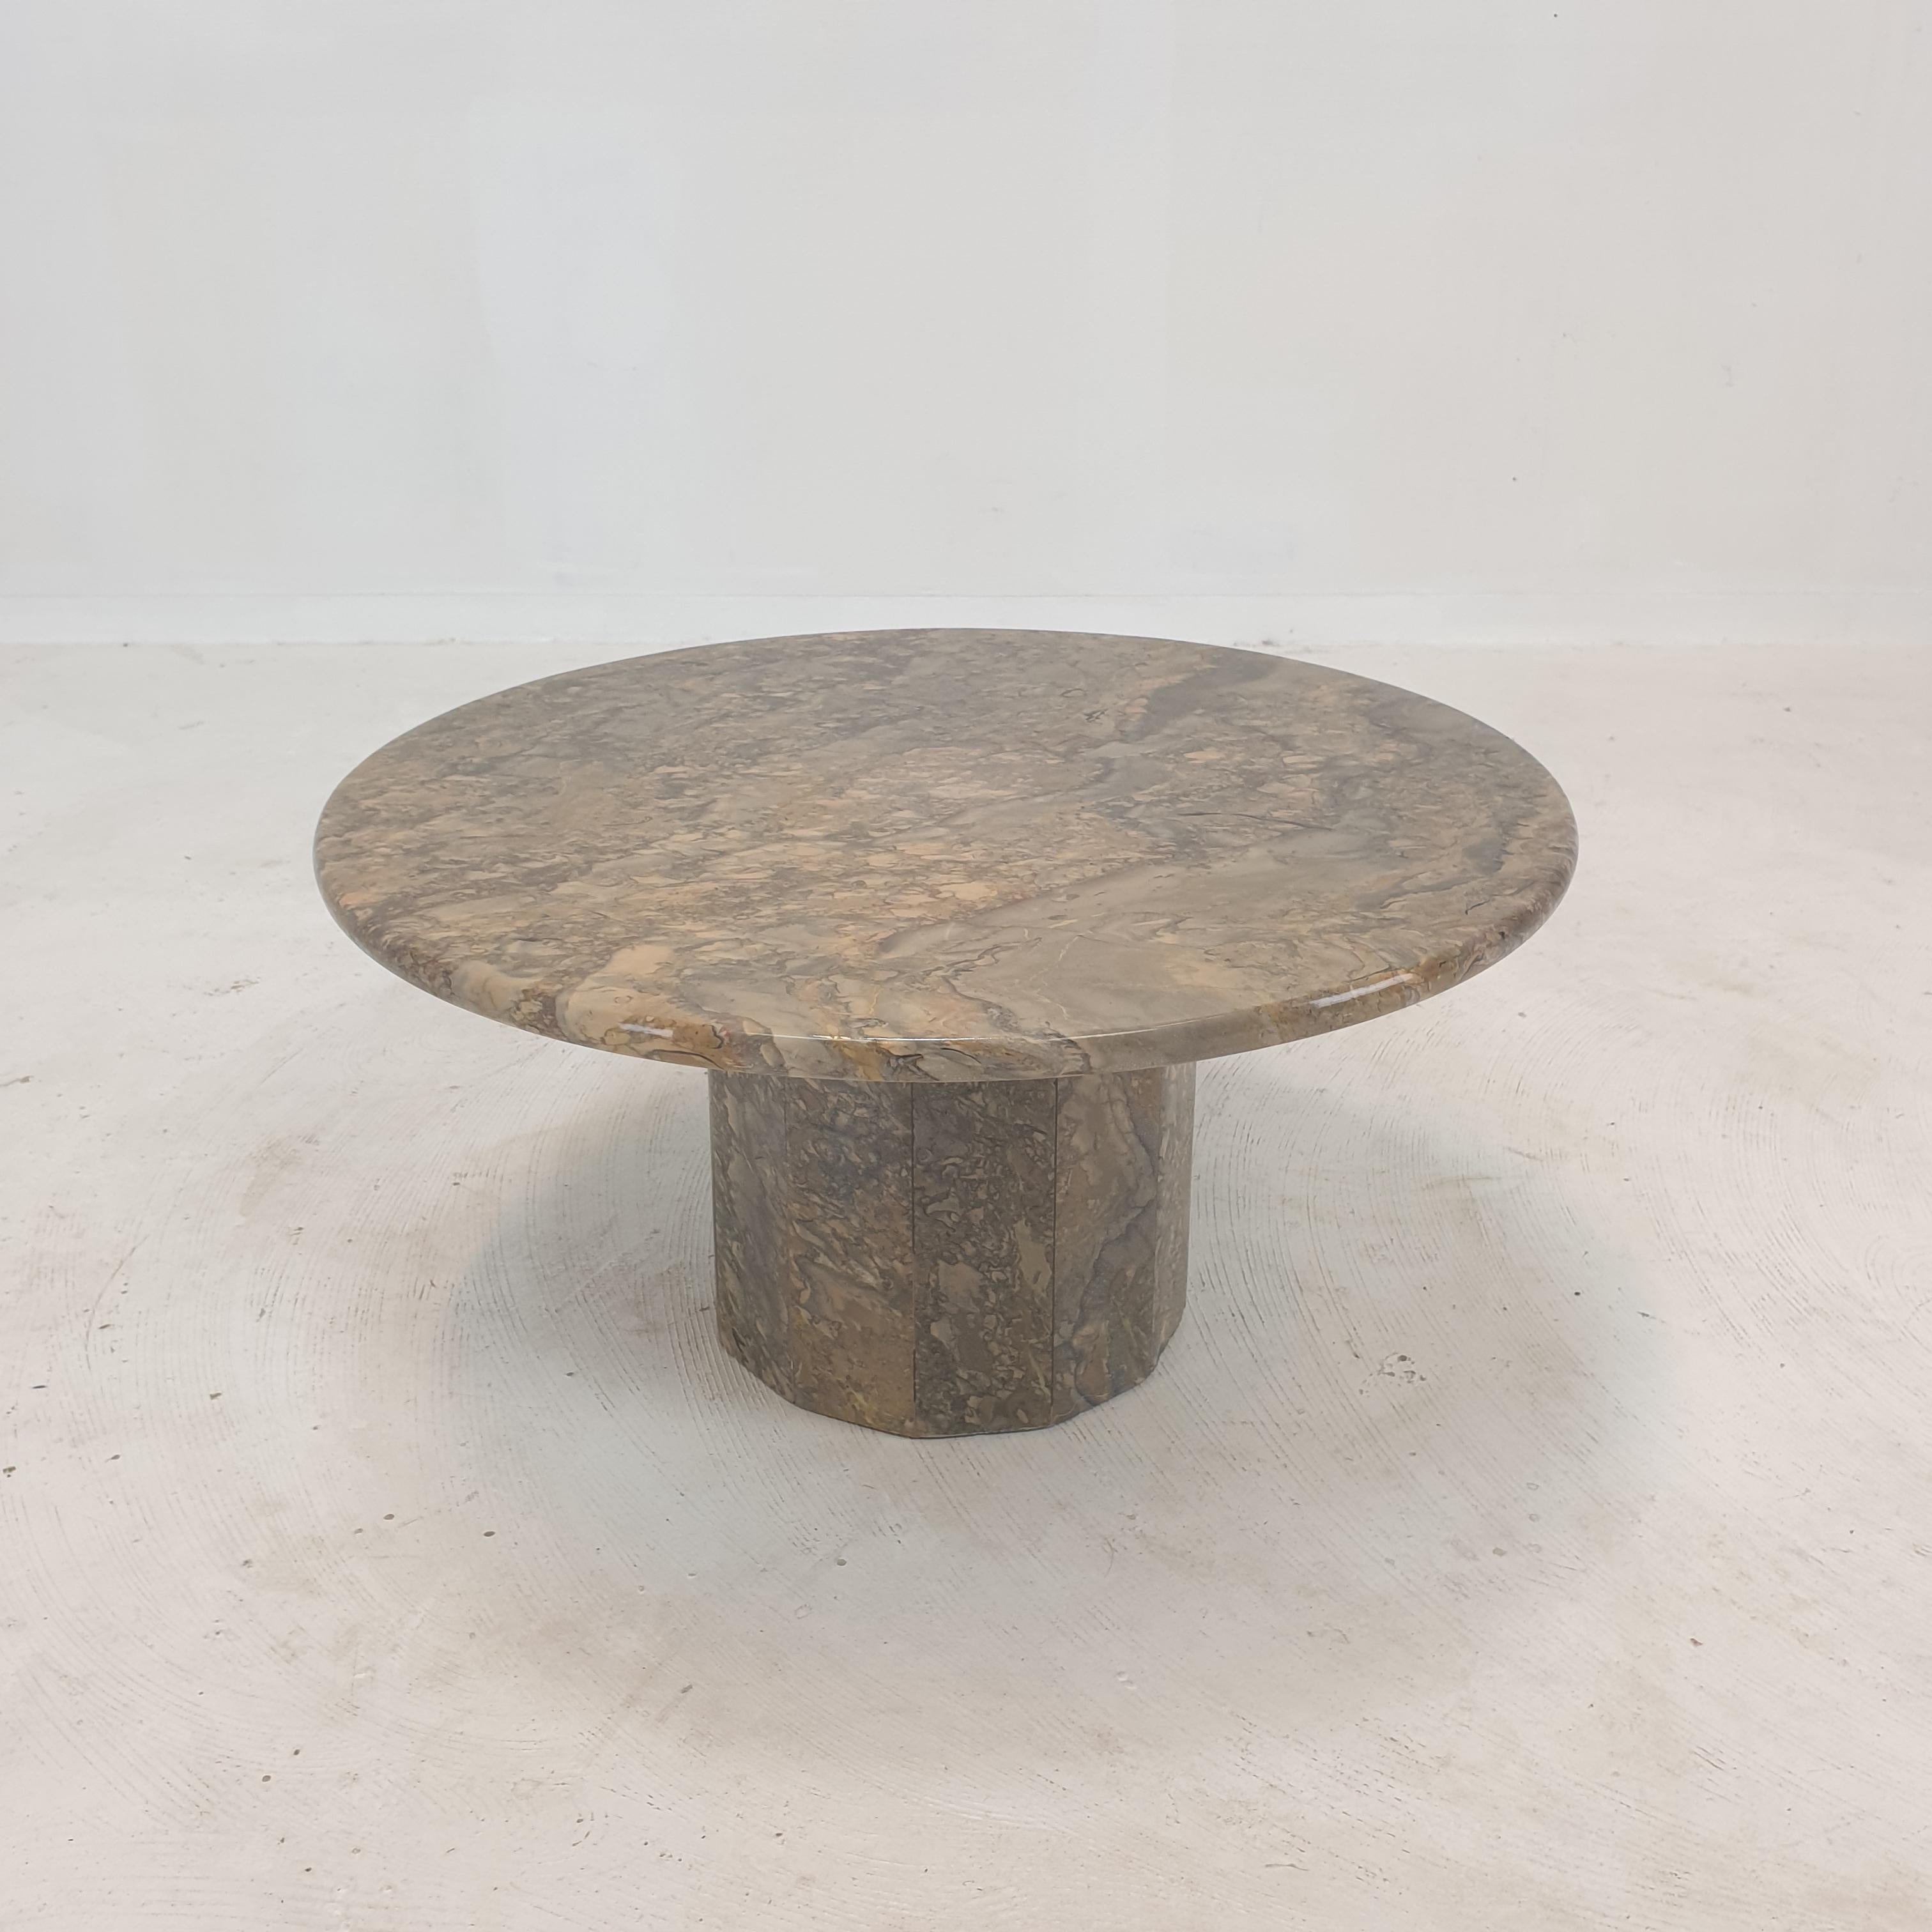 Very nice round Italian marble coffee table, 1980's.

The fabulous marble features a beautiful pattern of different colors.

It is in very good condition, with the normal traces of use.

We work with professional packers and shippers. We ship